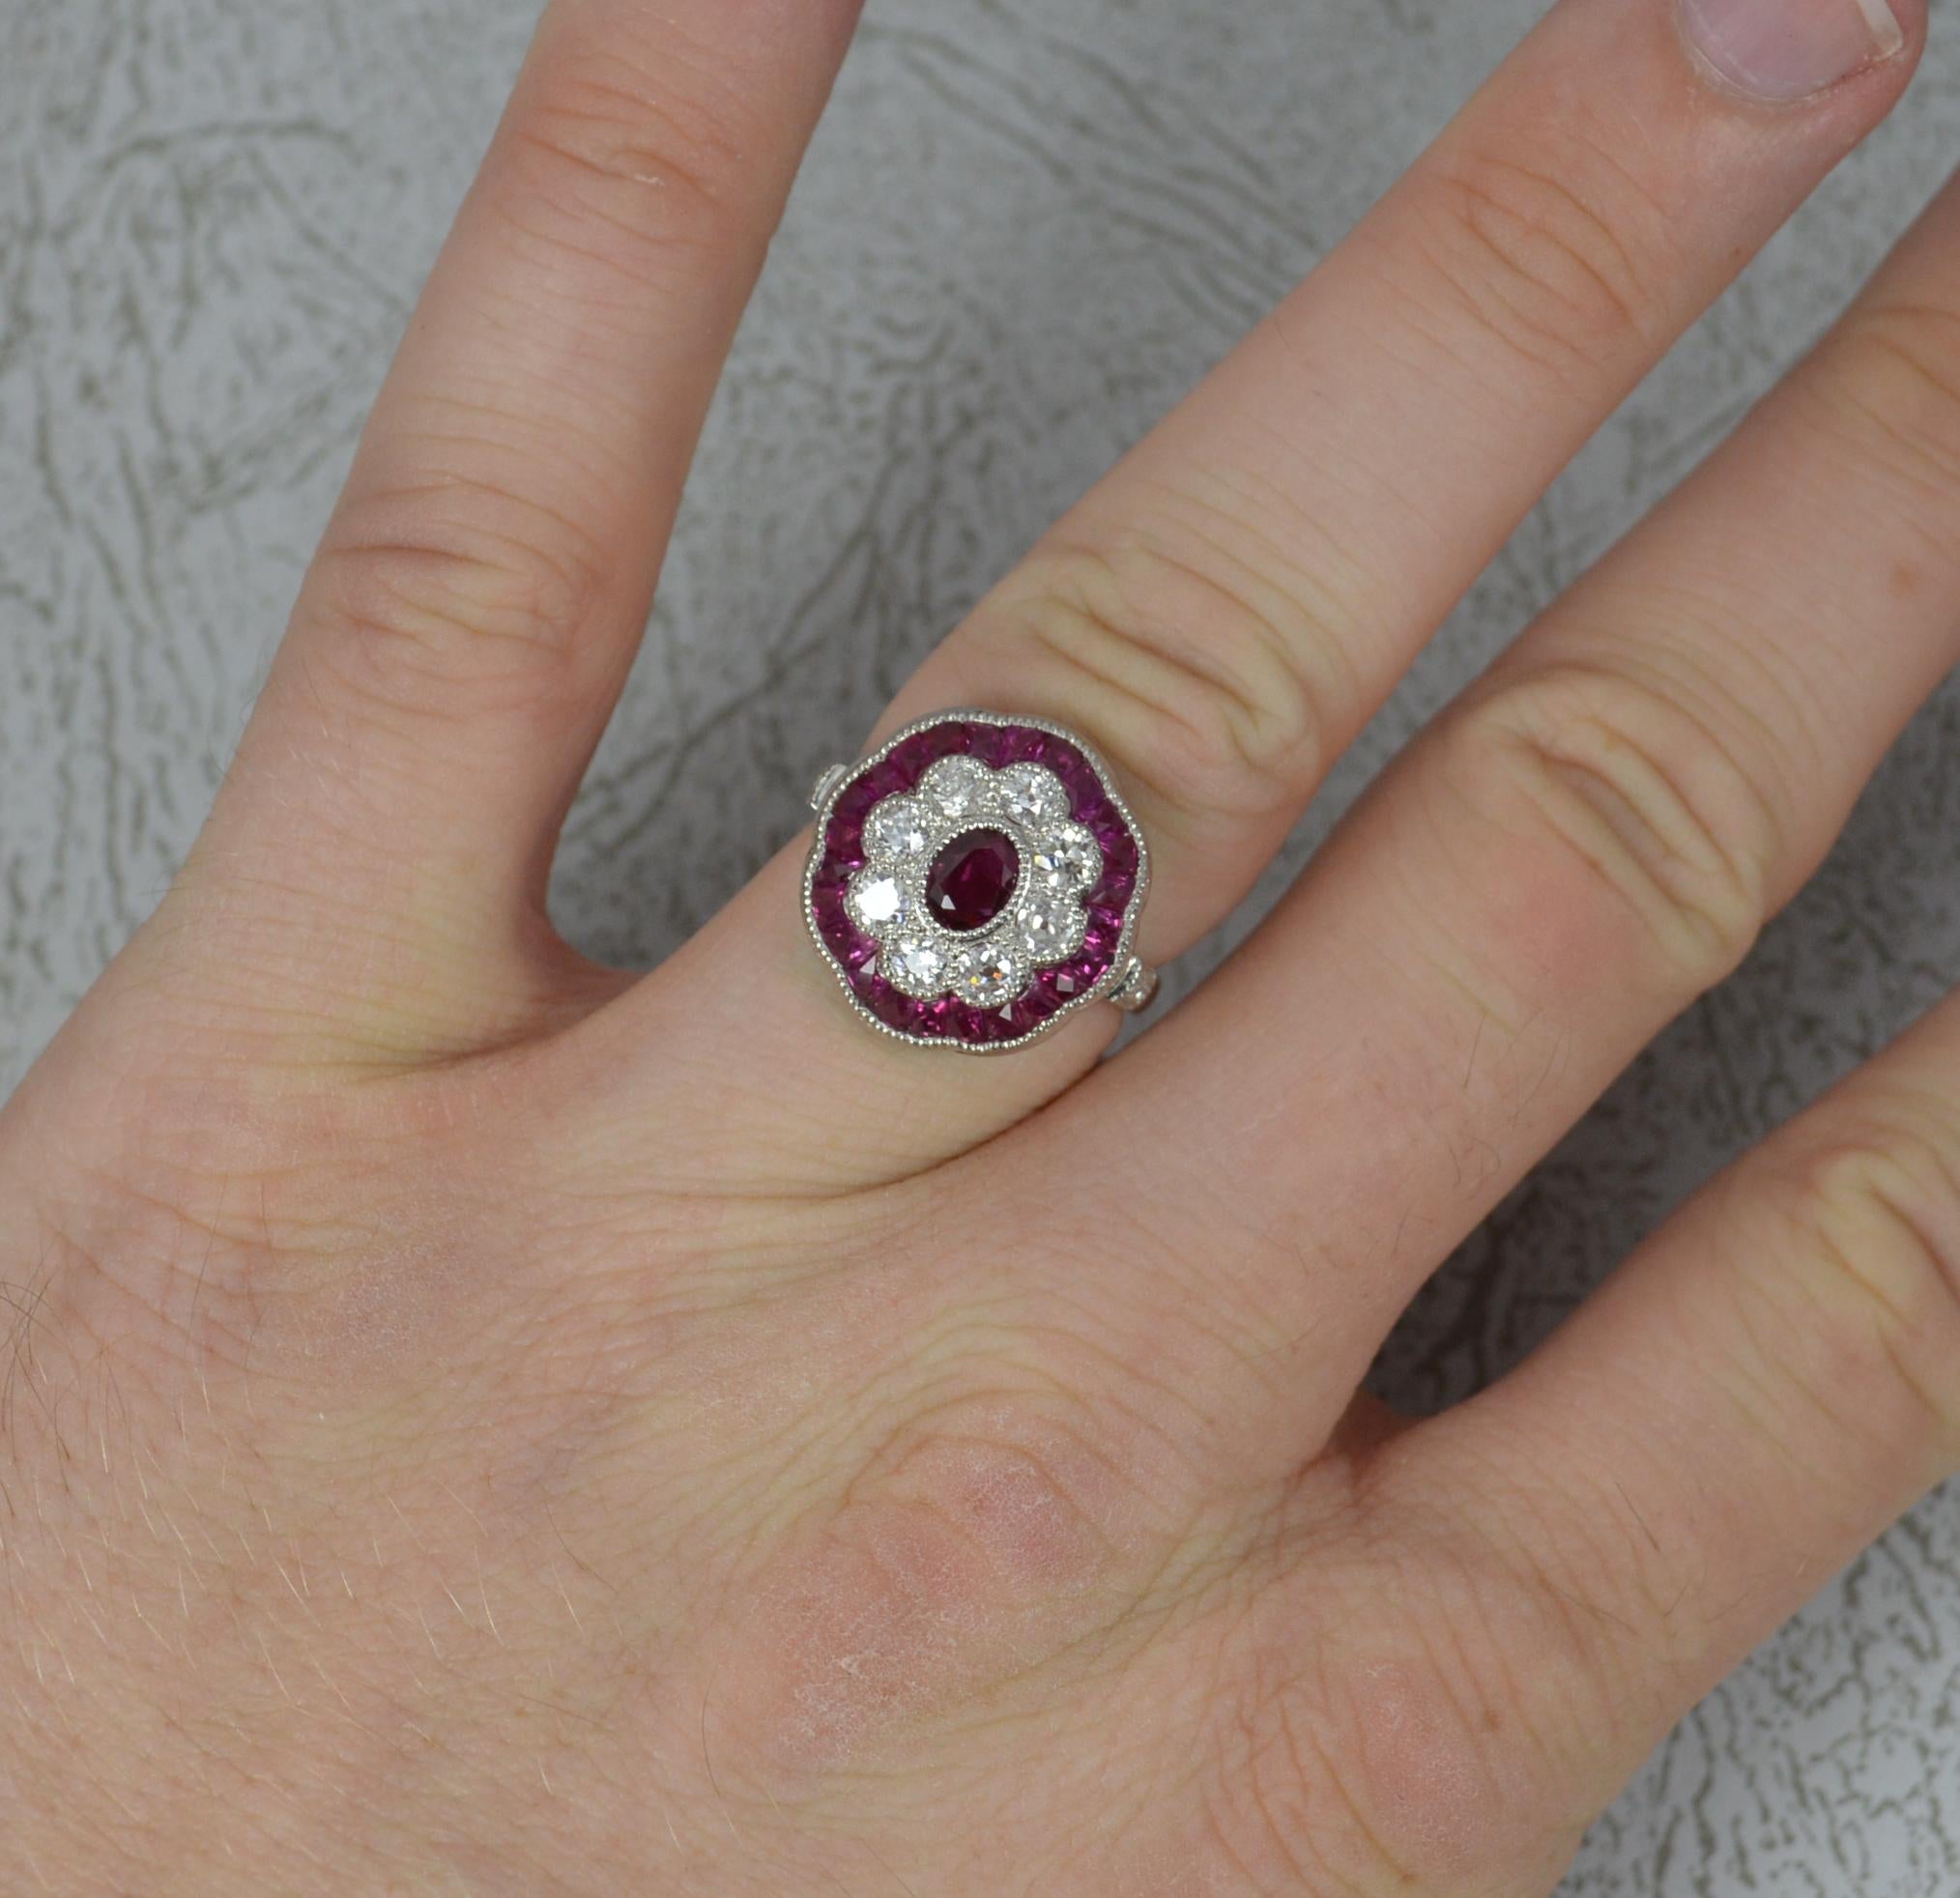 A very striking Ruby and Diamond cluster ring.
Designed with an oval ruby to centre in fine grain bezel setting with eight old European cut diamonds surrounding with fancy calibre, French cut rubies to the edge. 15.4mm x 16.7mm cluster head.
Set